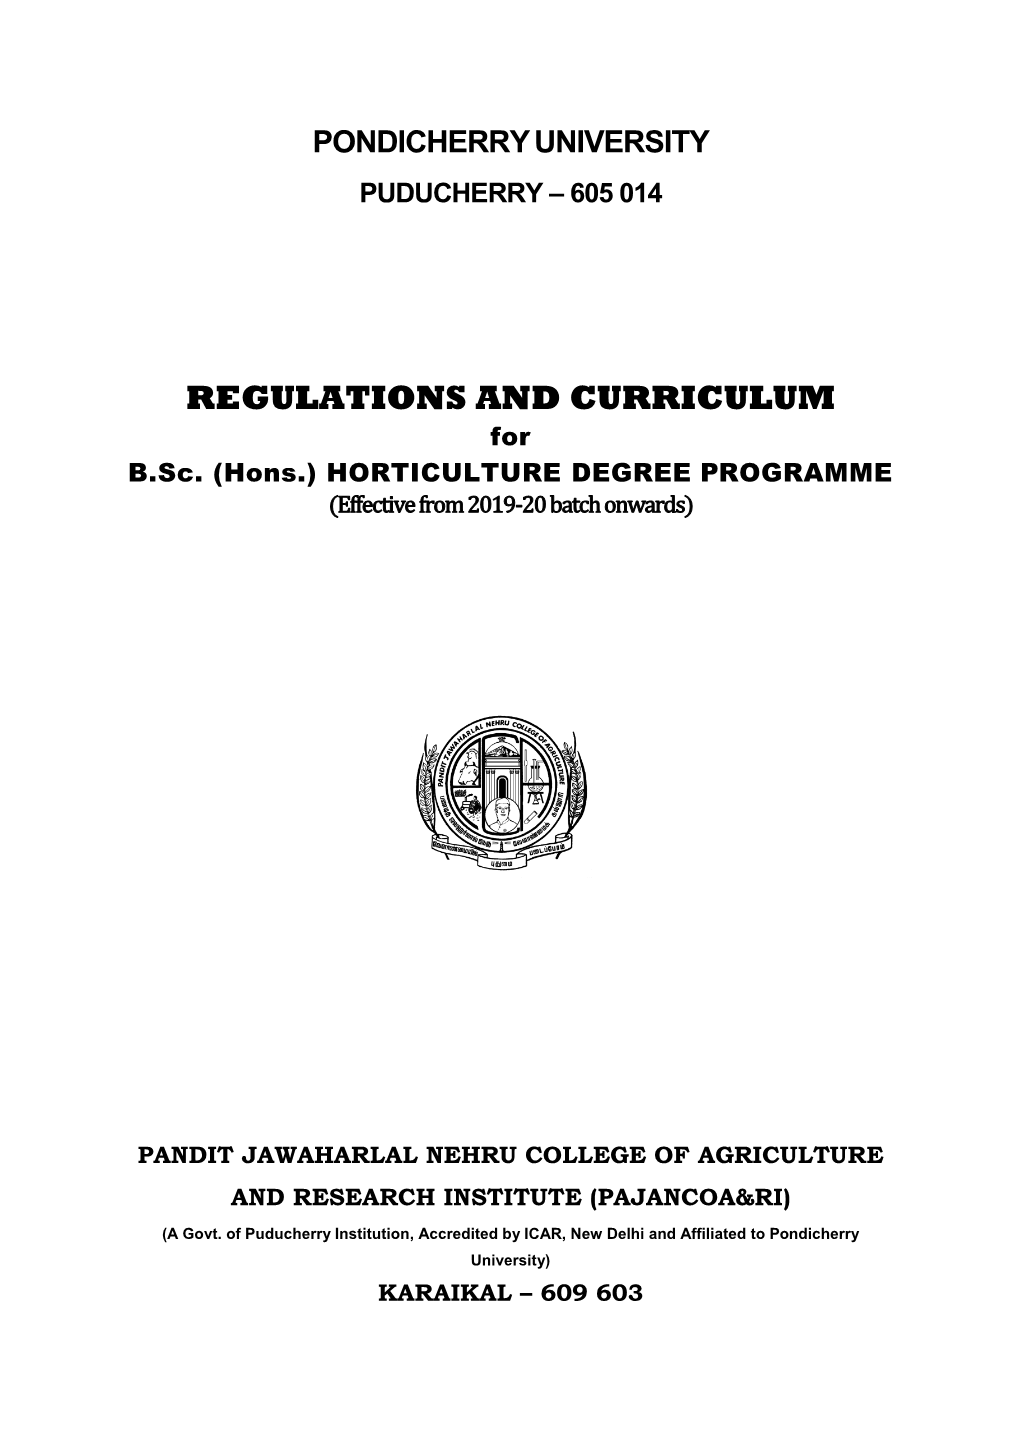 REGULATIONS and CURRICULUM for B.Sc